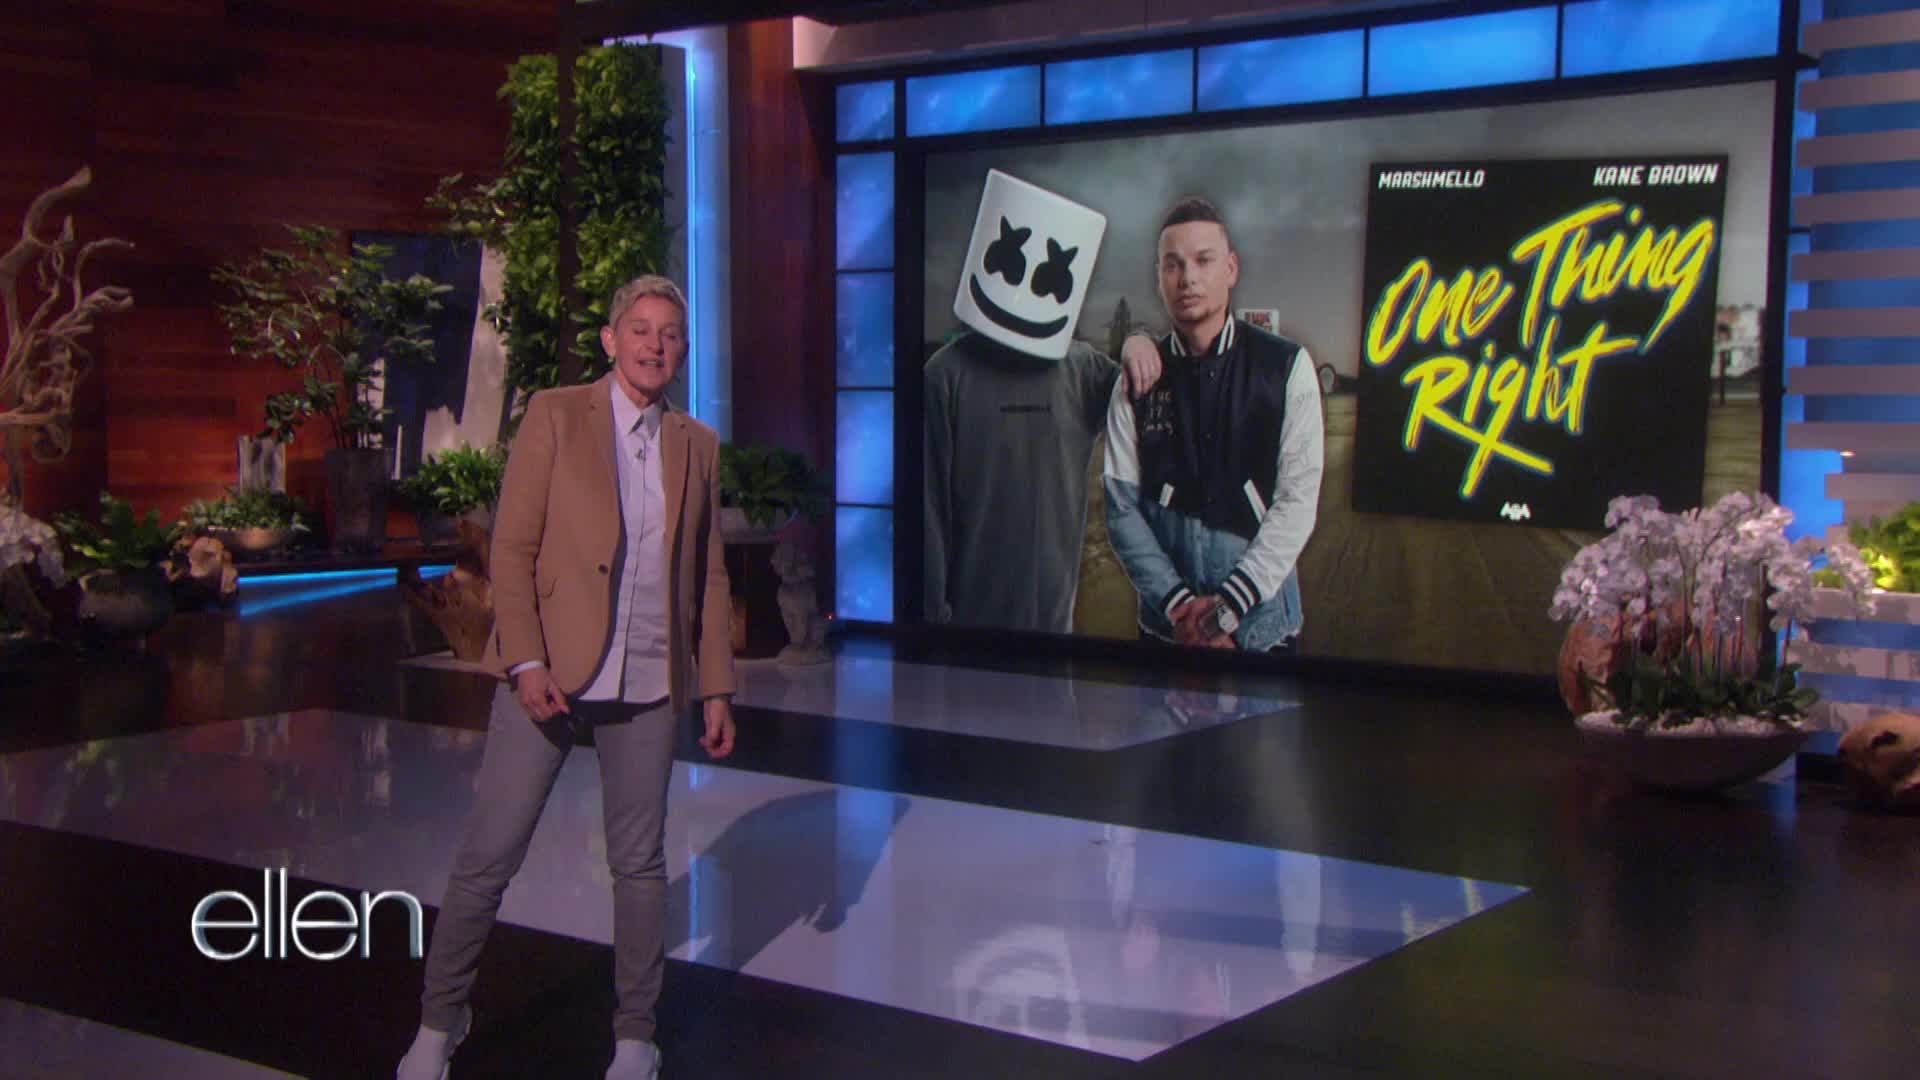 Marshmello and Kane Brown Have ‘One Thing Right’